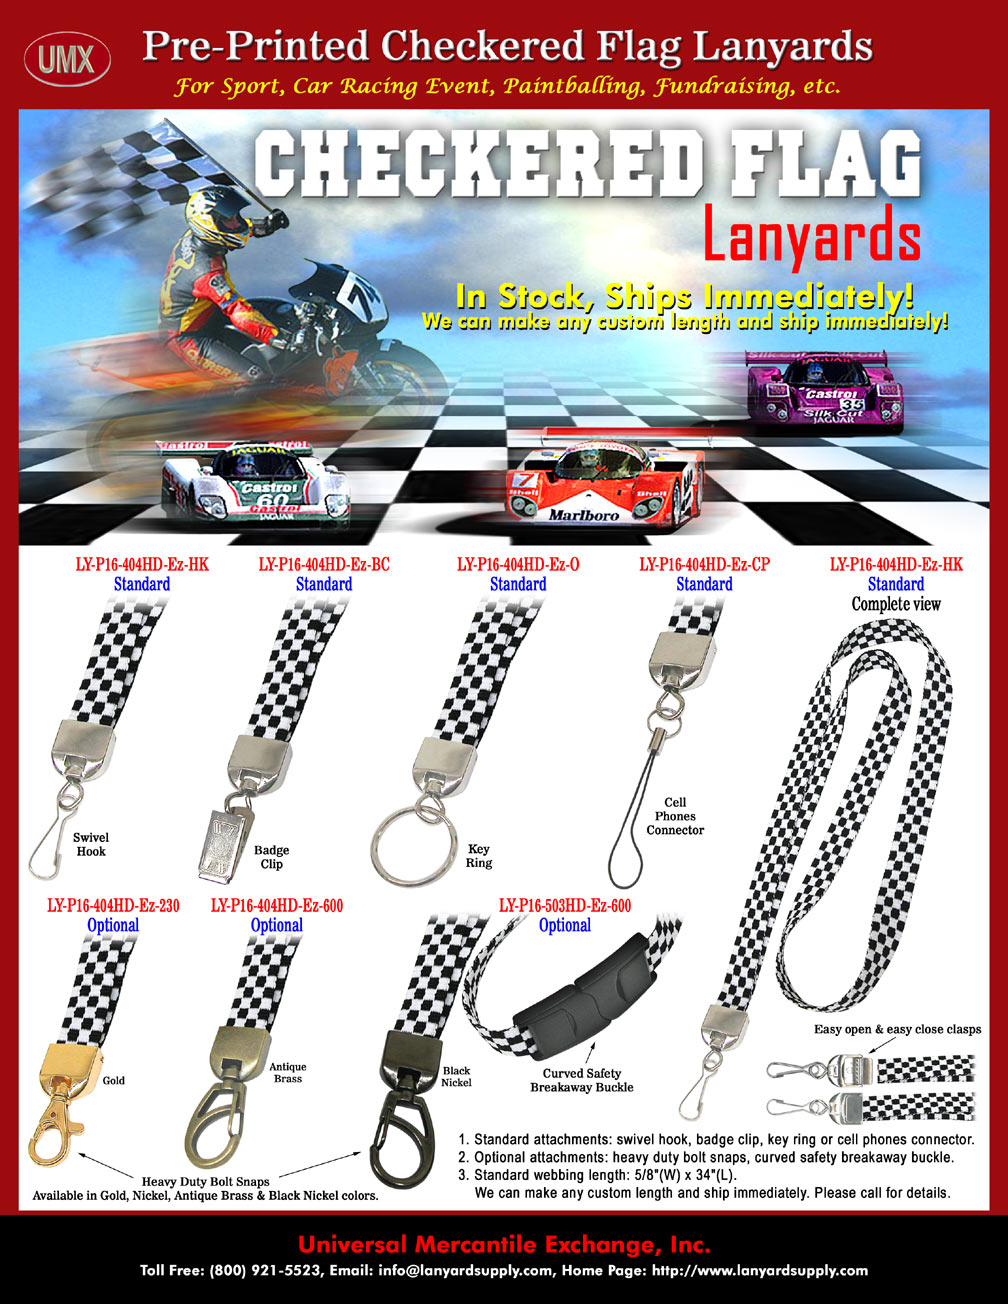 Car Racing Checkered Flag Lanyards with Square Black and White Color Chessboard Patterns